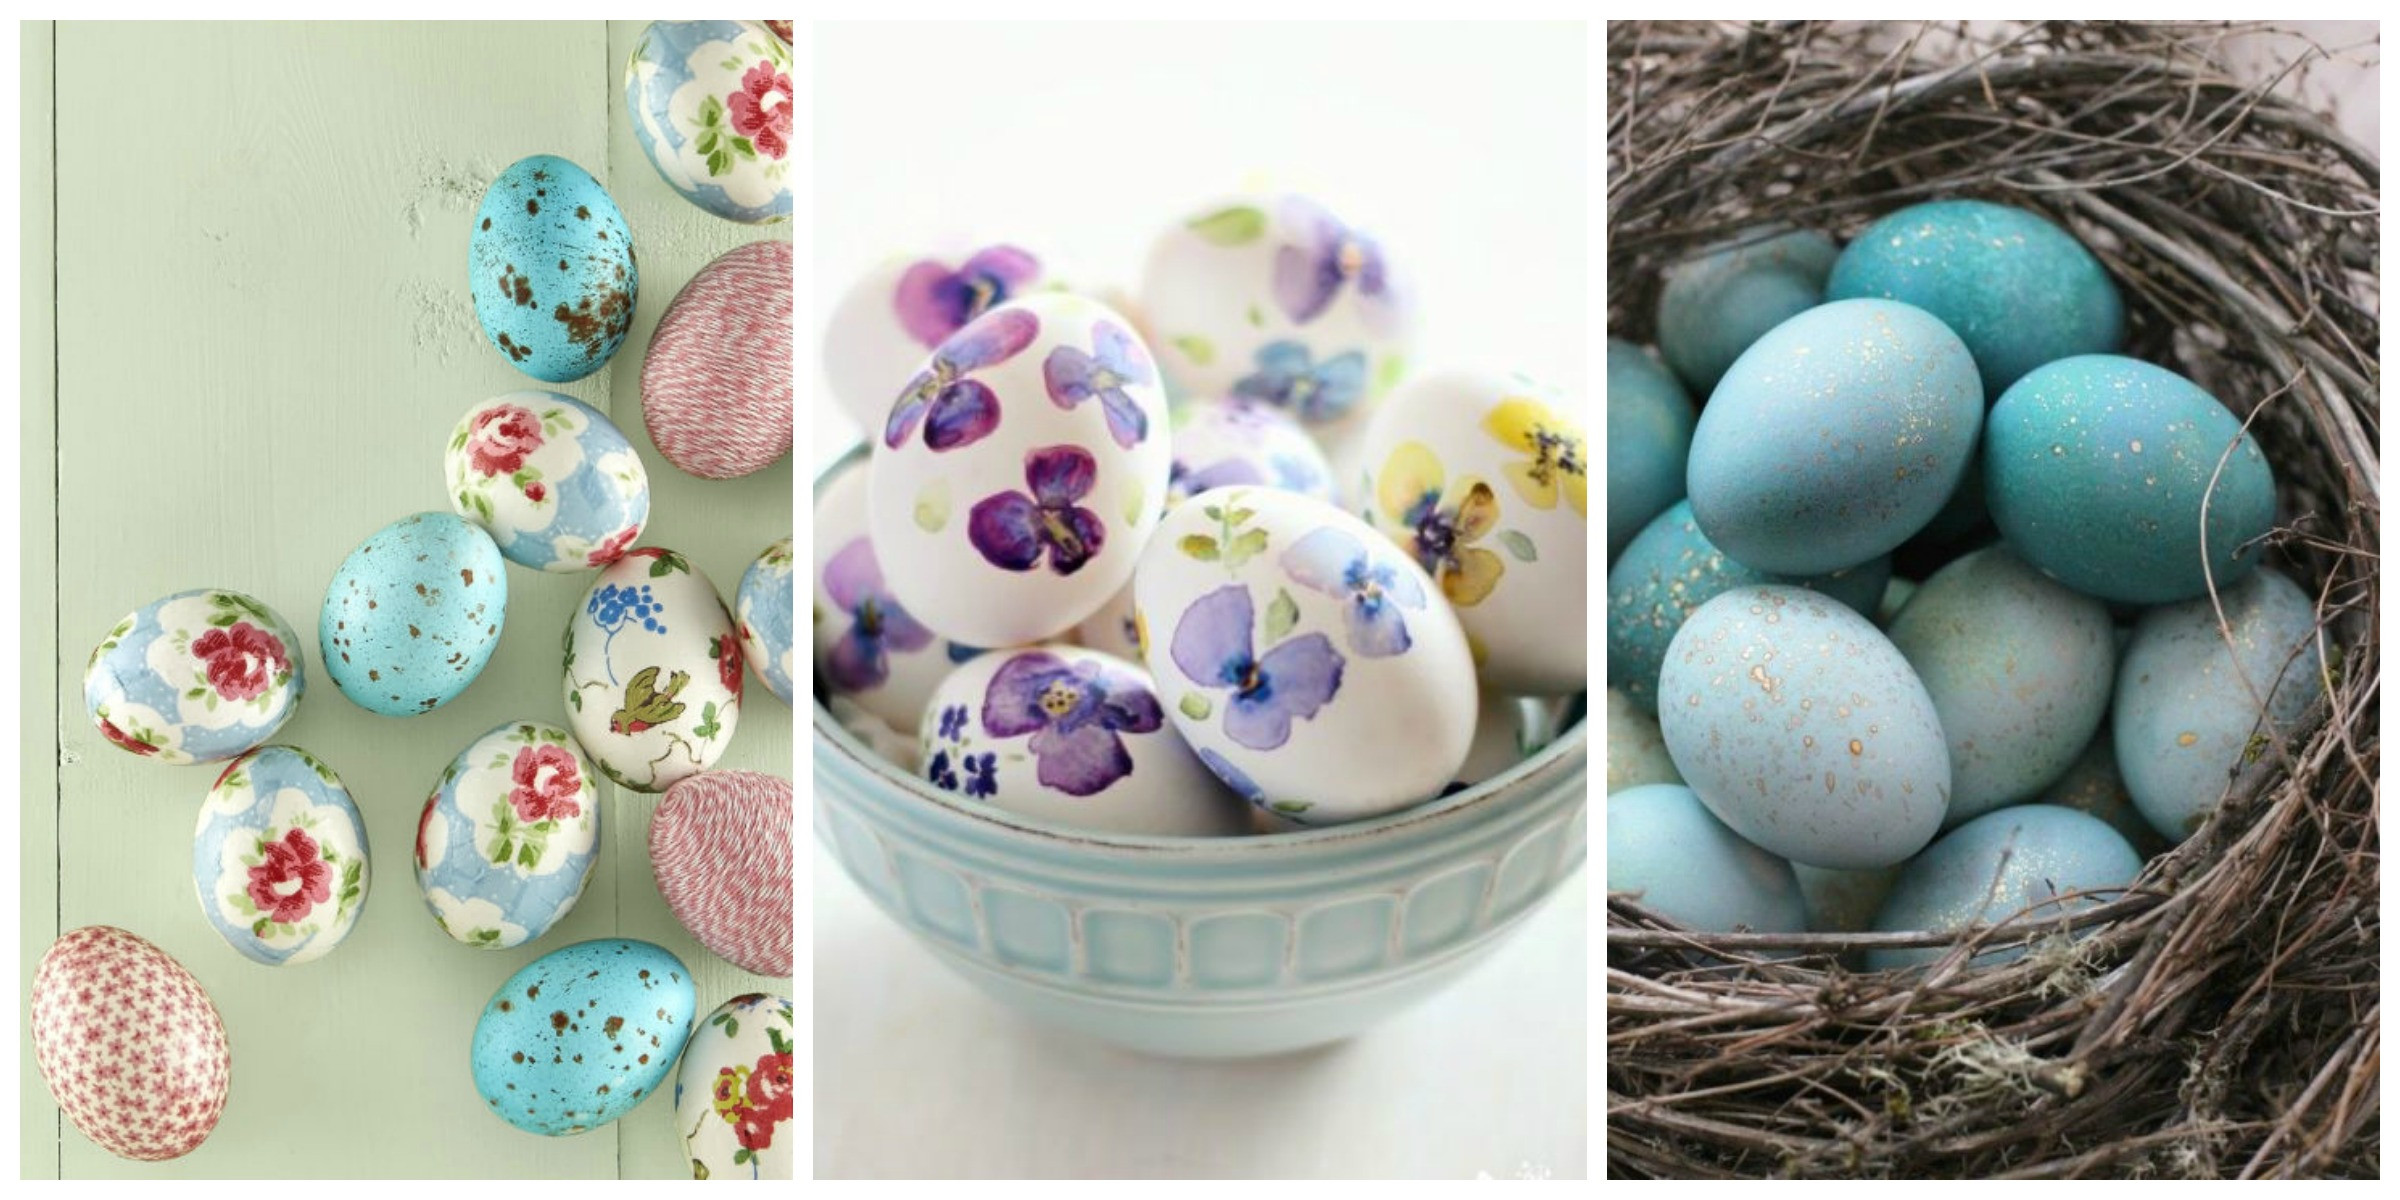 Easter Egg Decorating Ideas
 60 Fun Easter Egg Designs Creative Ideas for Decorating